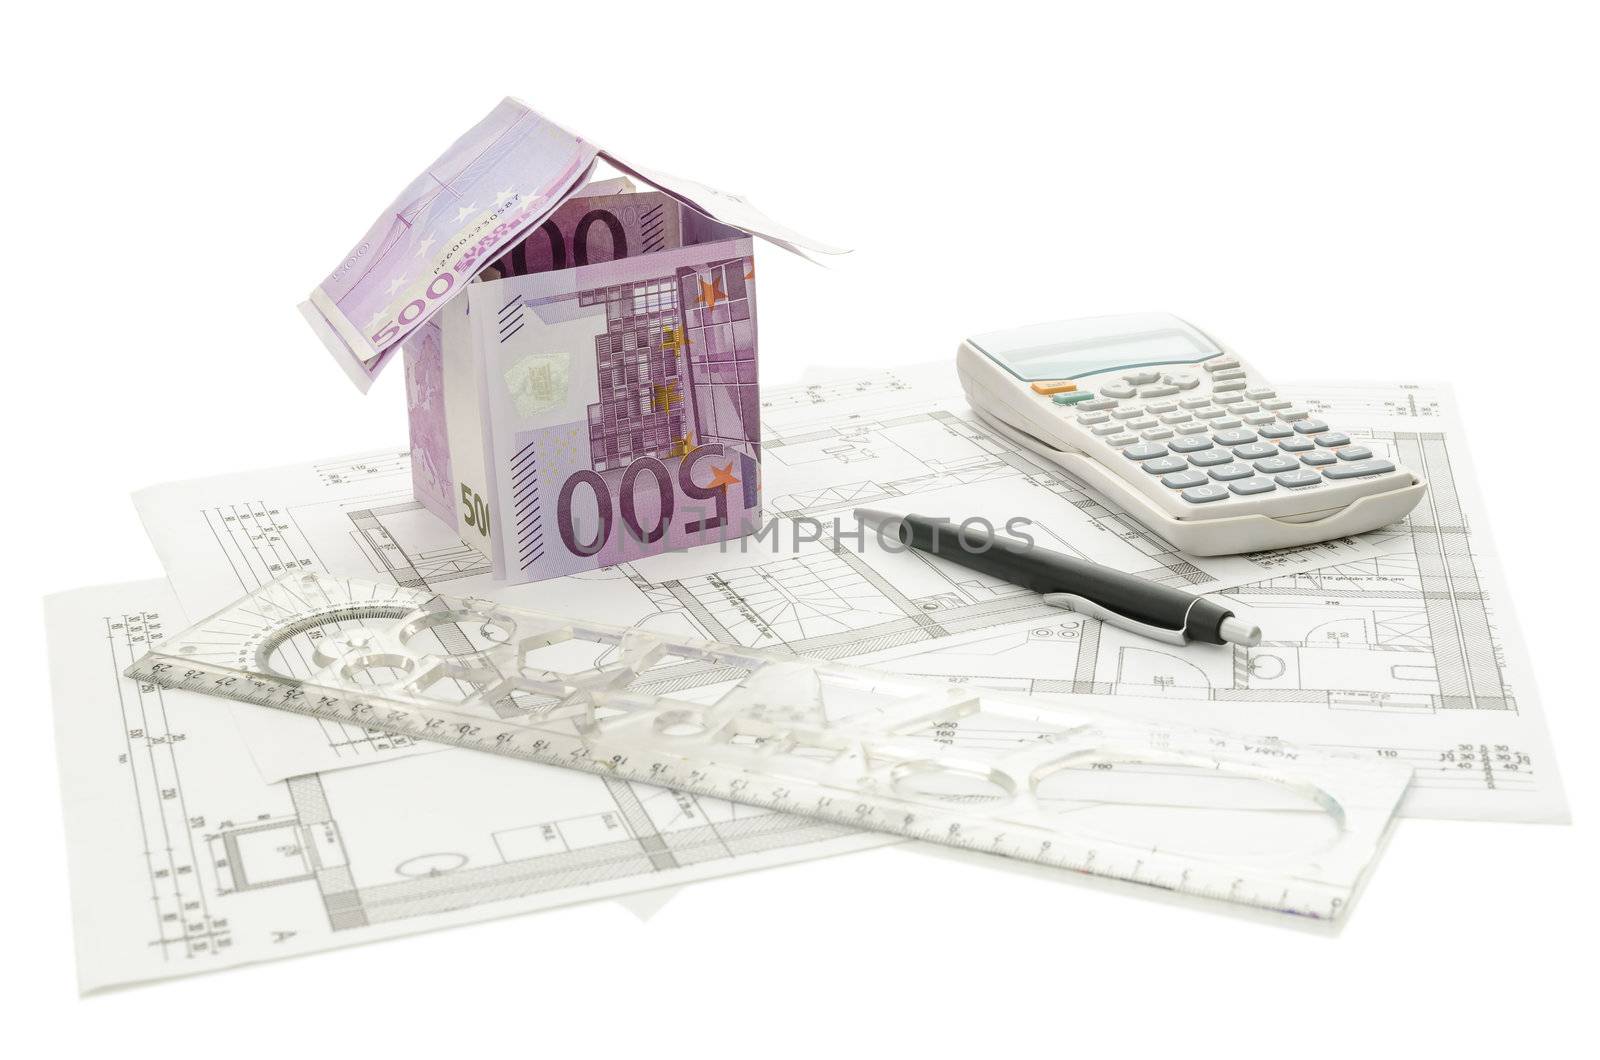 House made of 500 Euro money on an architectural building plan. Isolated on a white background.